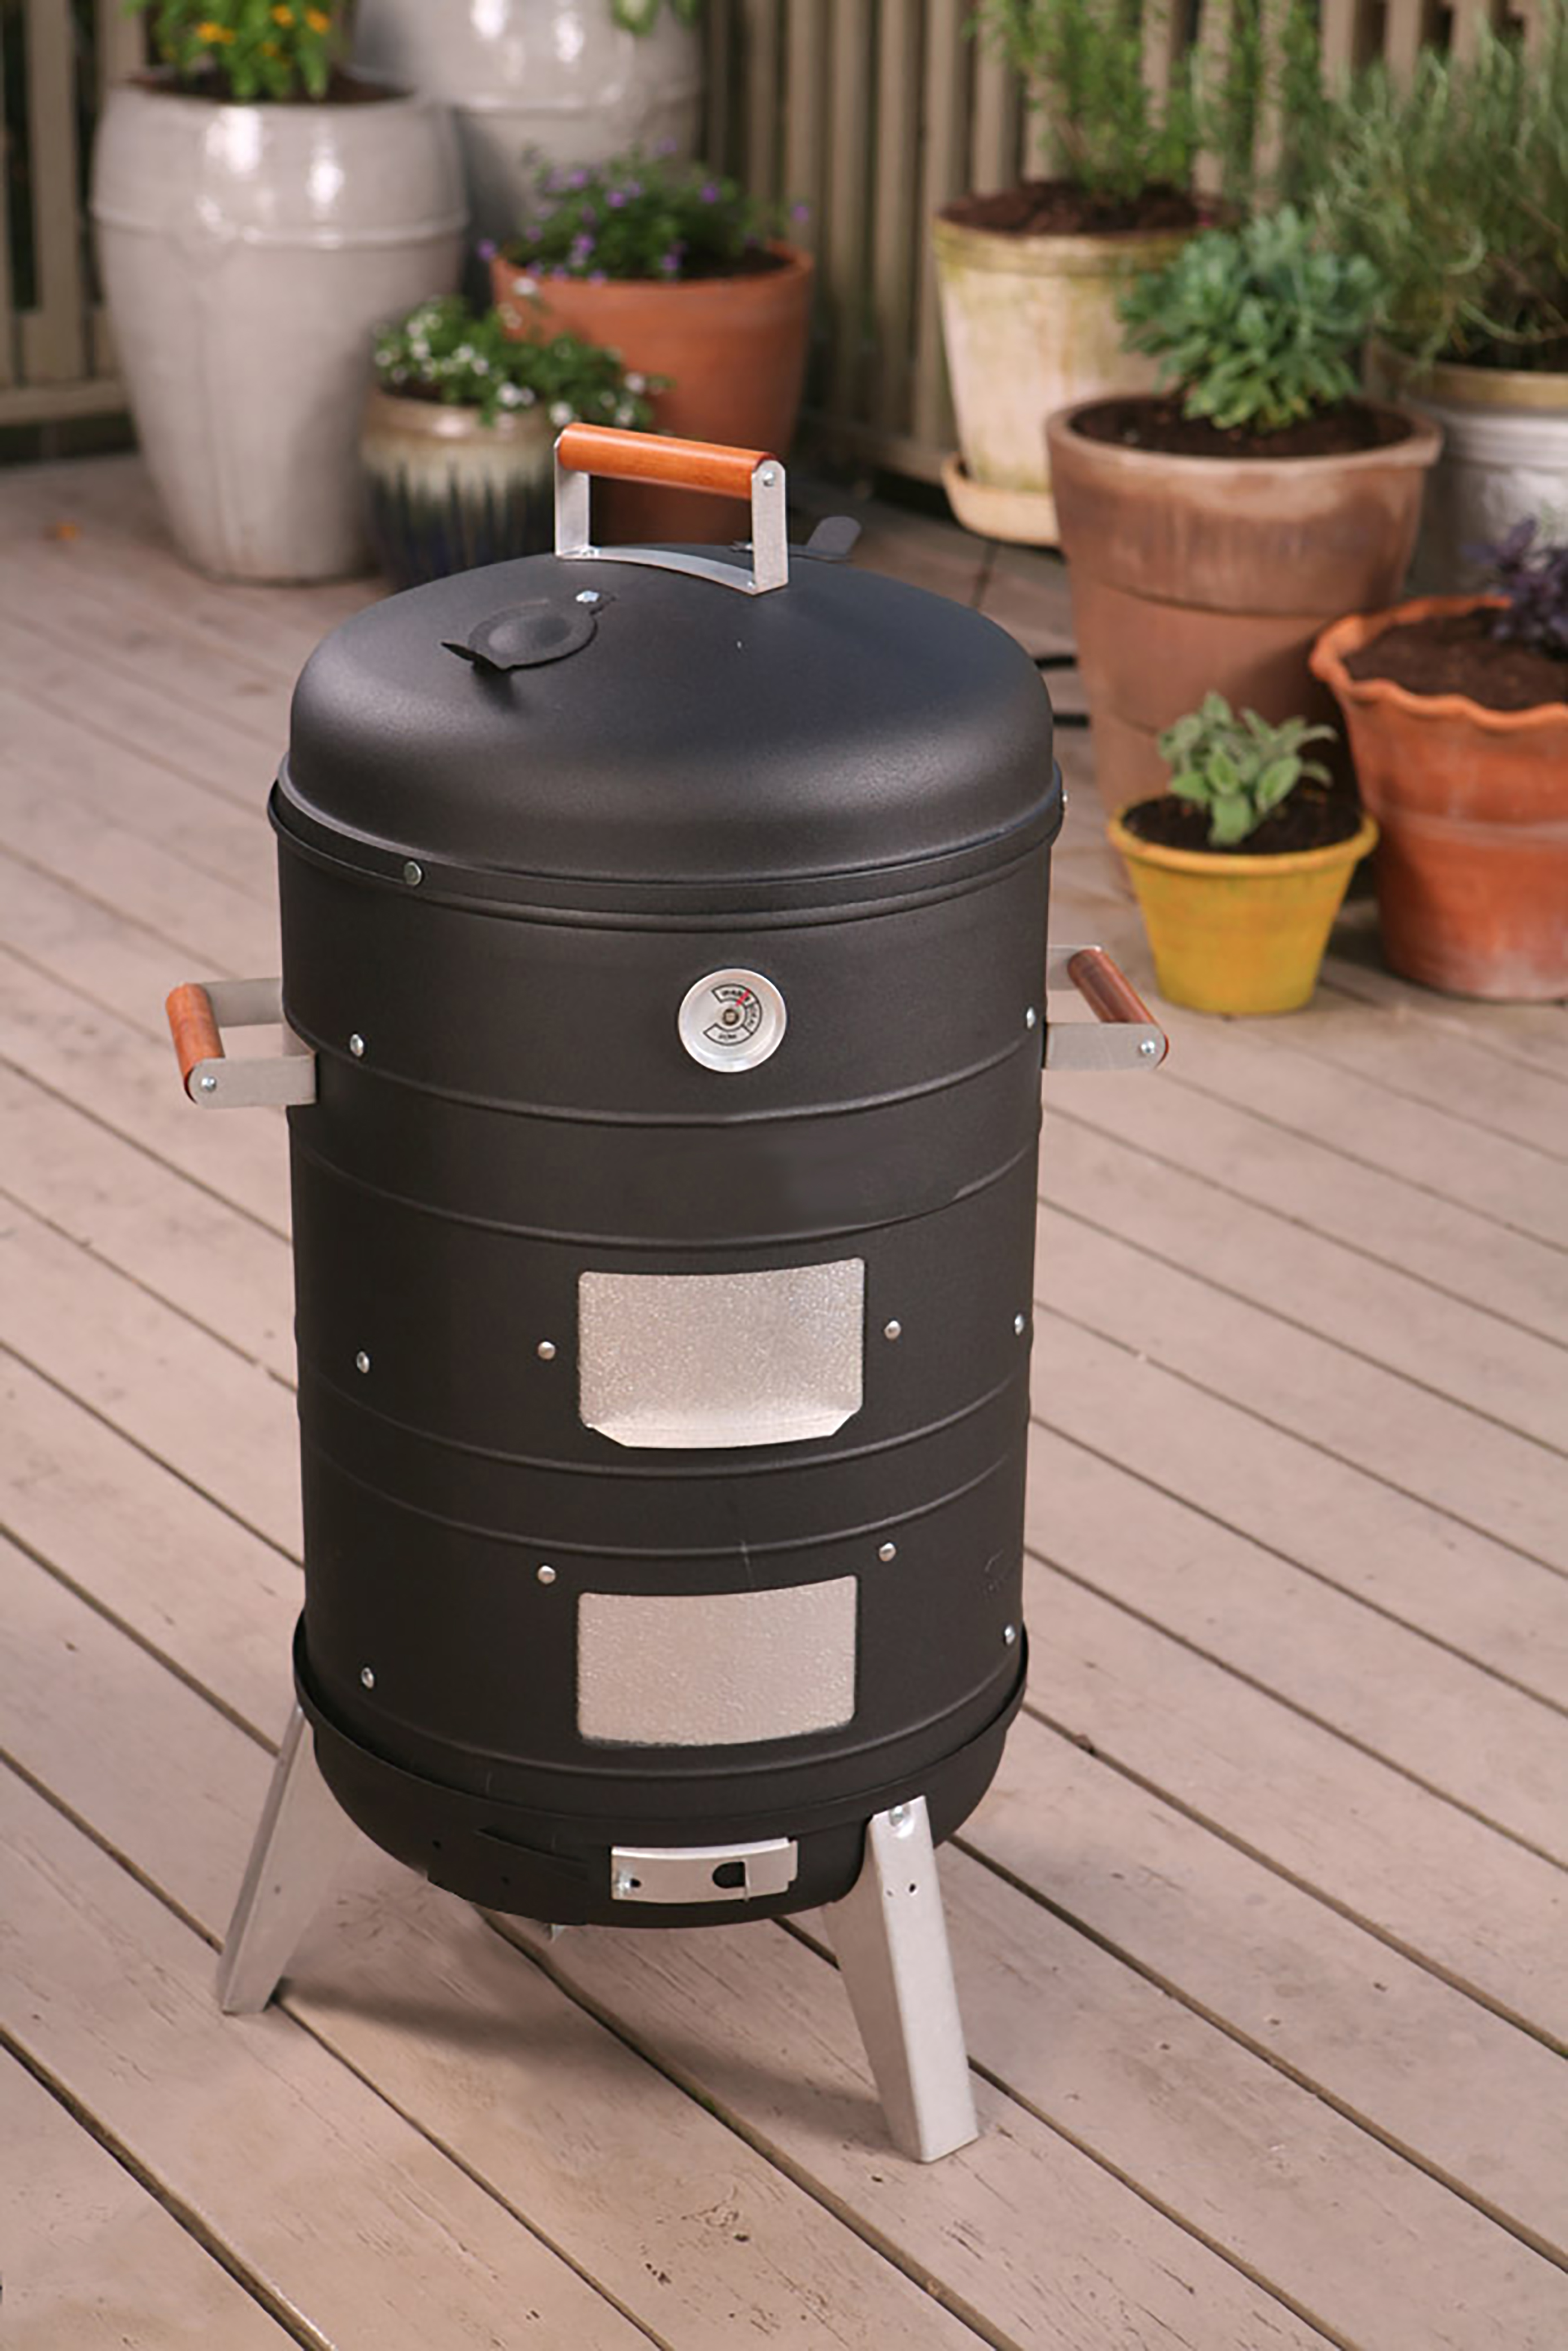 Americana Charcoal 2-In-1 Combination Water Smoker - image 2 of 10